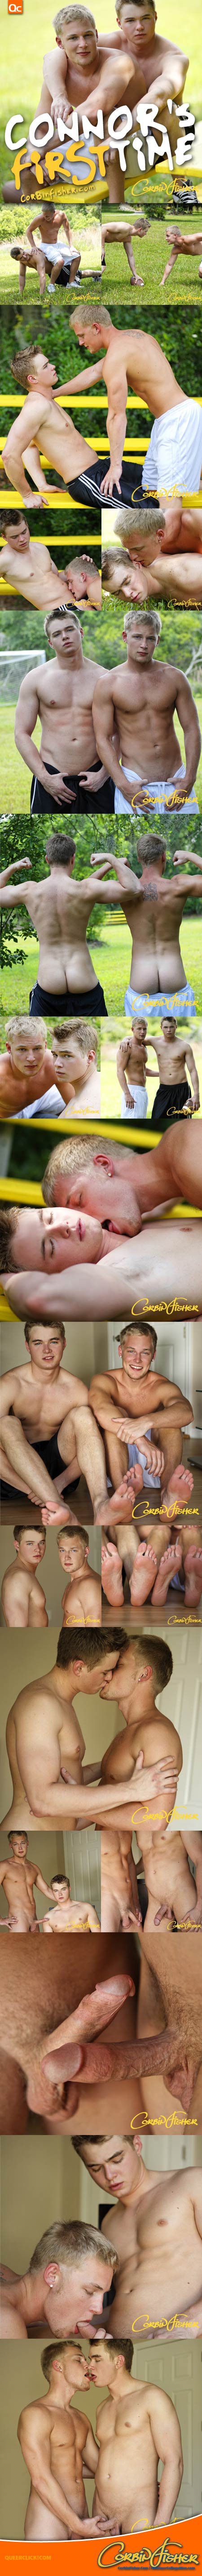 Connor's First Time at CorbinFisher.com